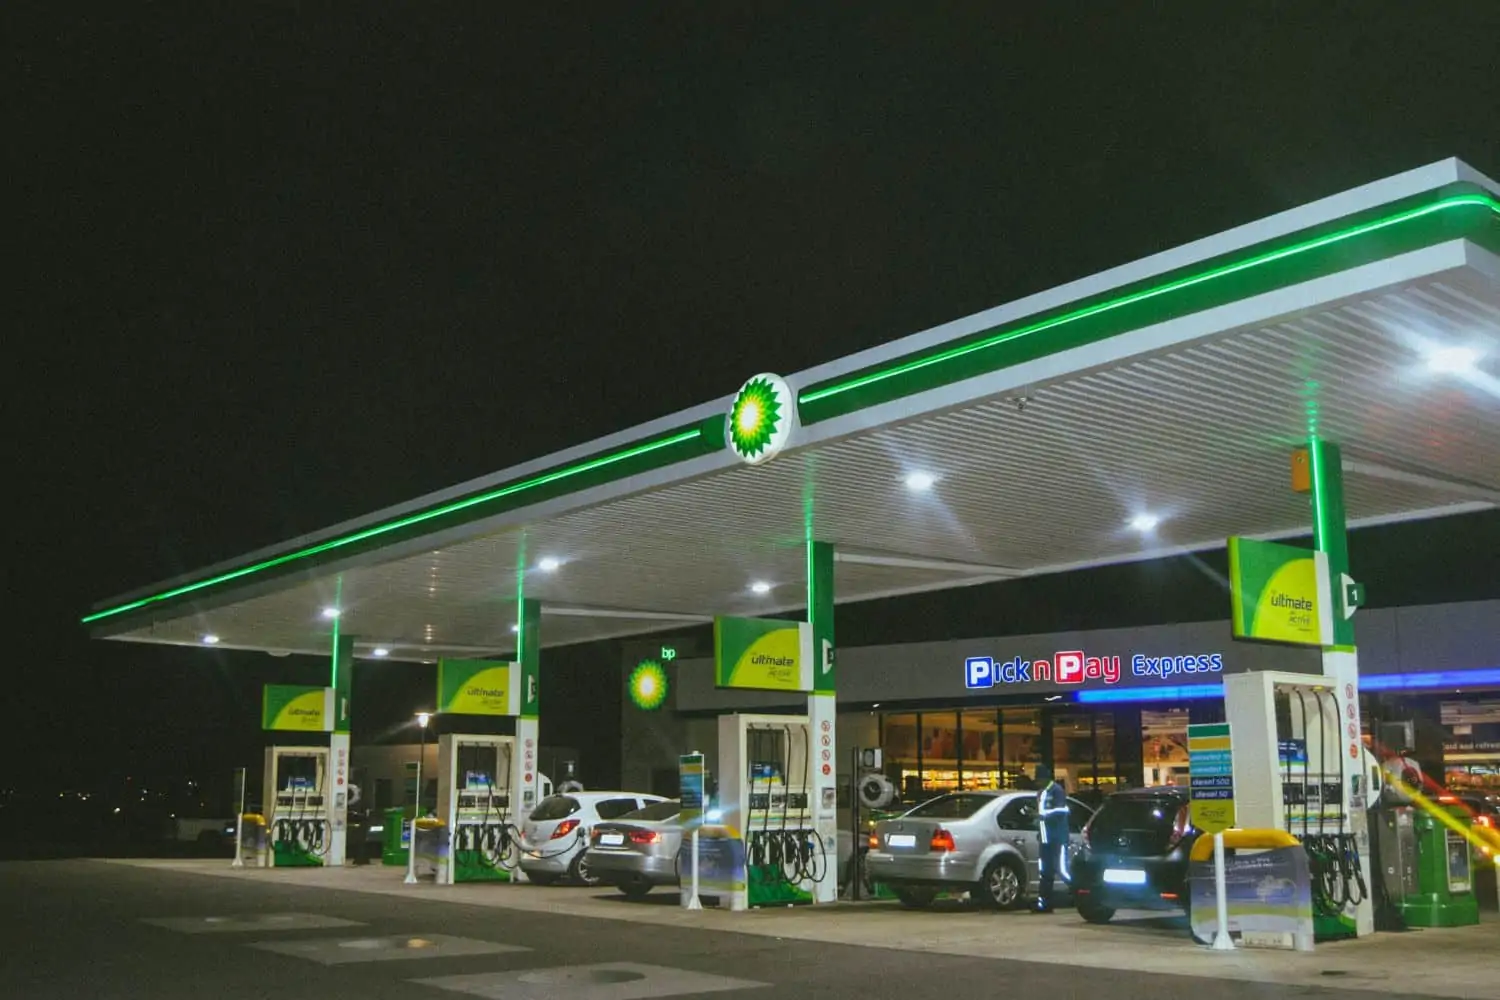 Motorists brace themselves as petrol price hike rumours to be "painful"